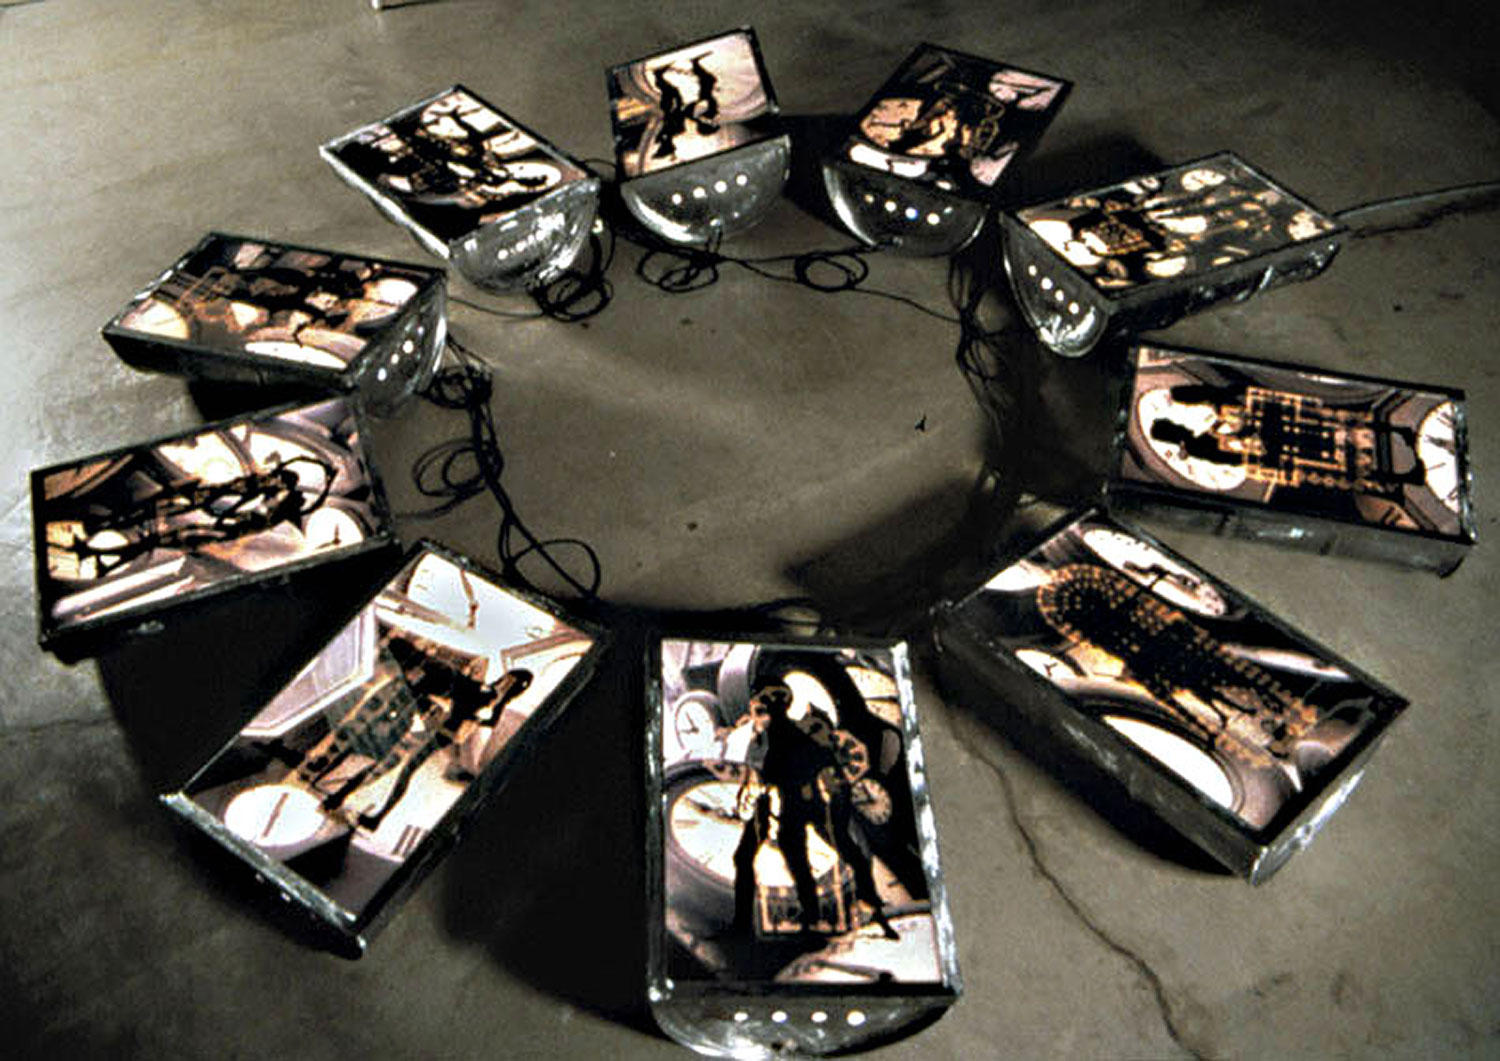 Chronos, 1999, installation view, color transparencies, 10 halved fifty-five gallon barrels (light box), 240 x 240<br><br>Ouranos covered and copulated with Gaia until their son Kronos became angered and castrated him, separating sky from earth and becoming known as the creator of time. The color transparencies overlay male and female figures with ten influential cathedrals and Arman clocks.